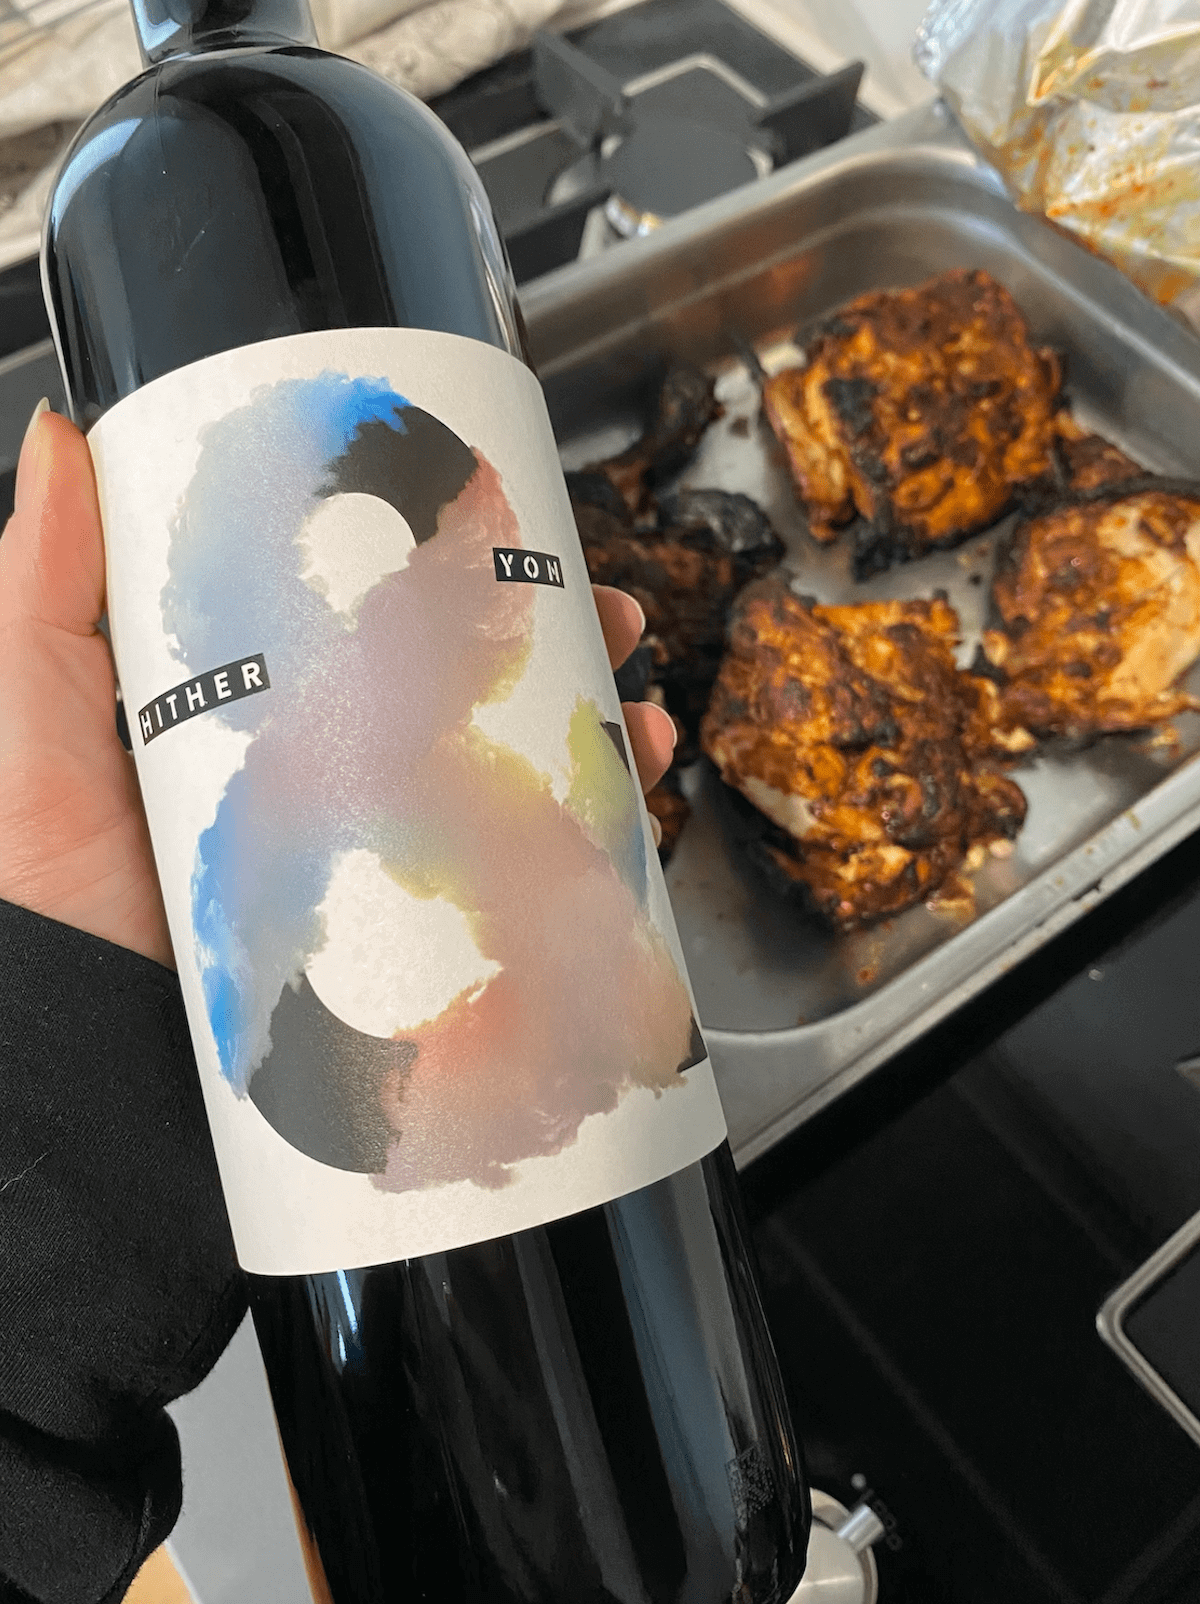 Hither and Yon 2019 Touriga and Portuguese Style Chicken